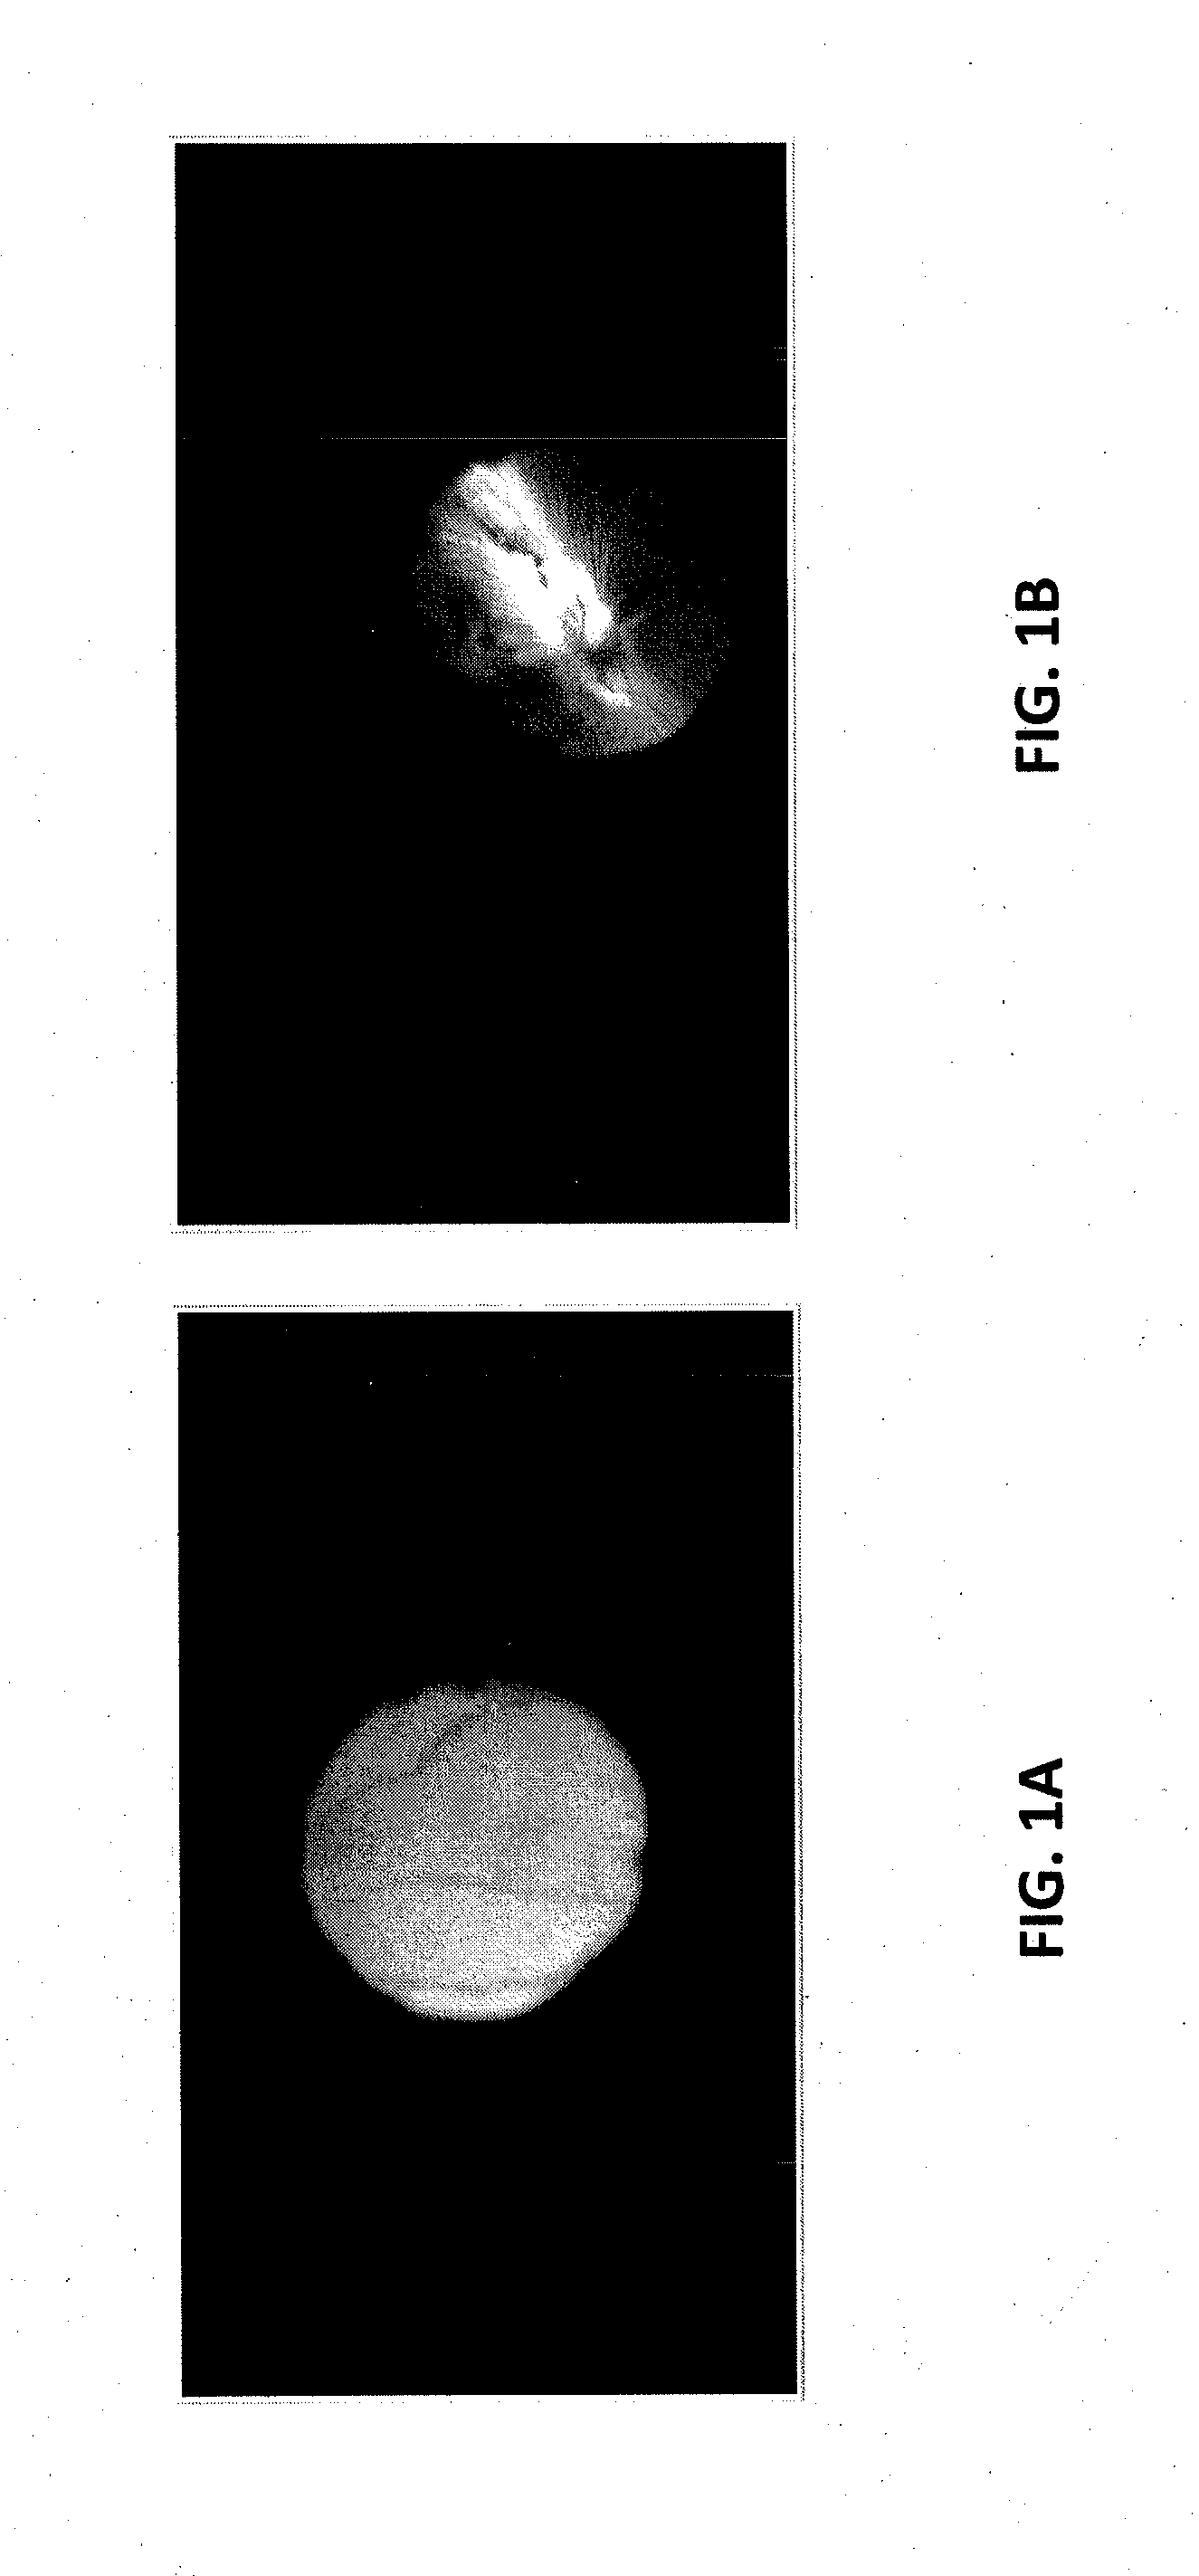 Augmented field of view imaging system